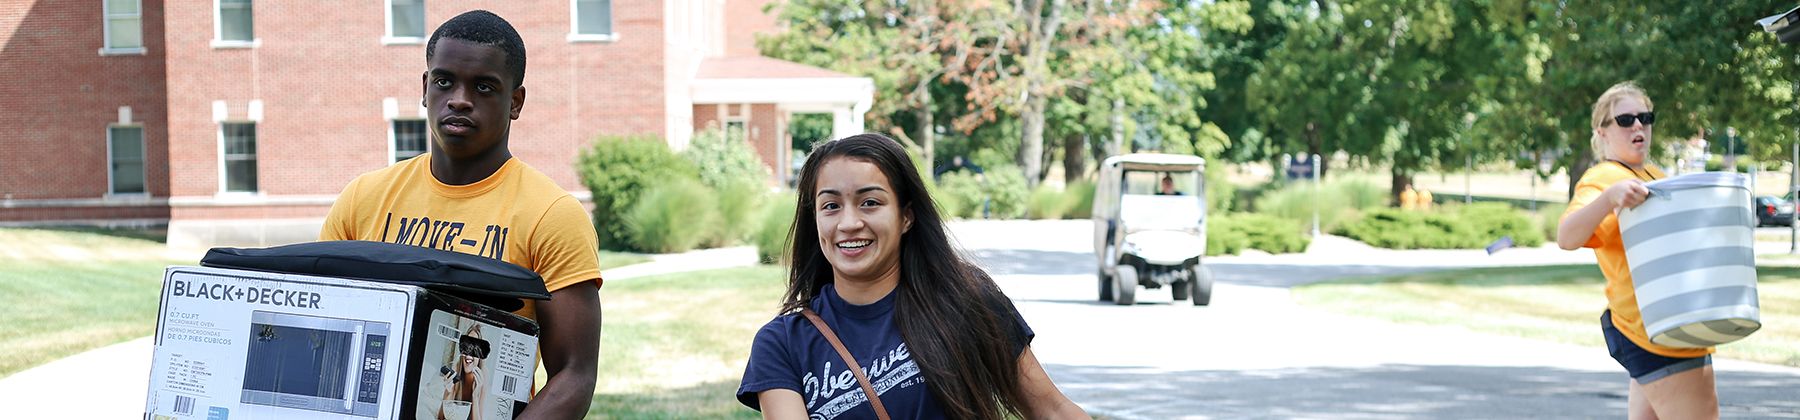 Plan your move-in at Marian University